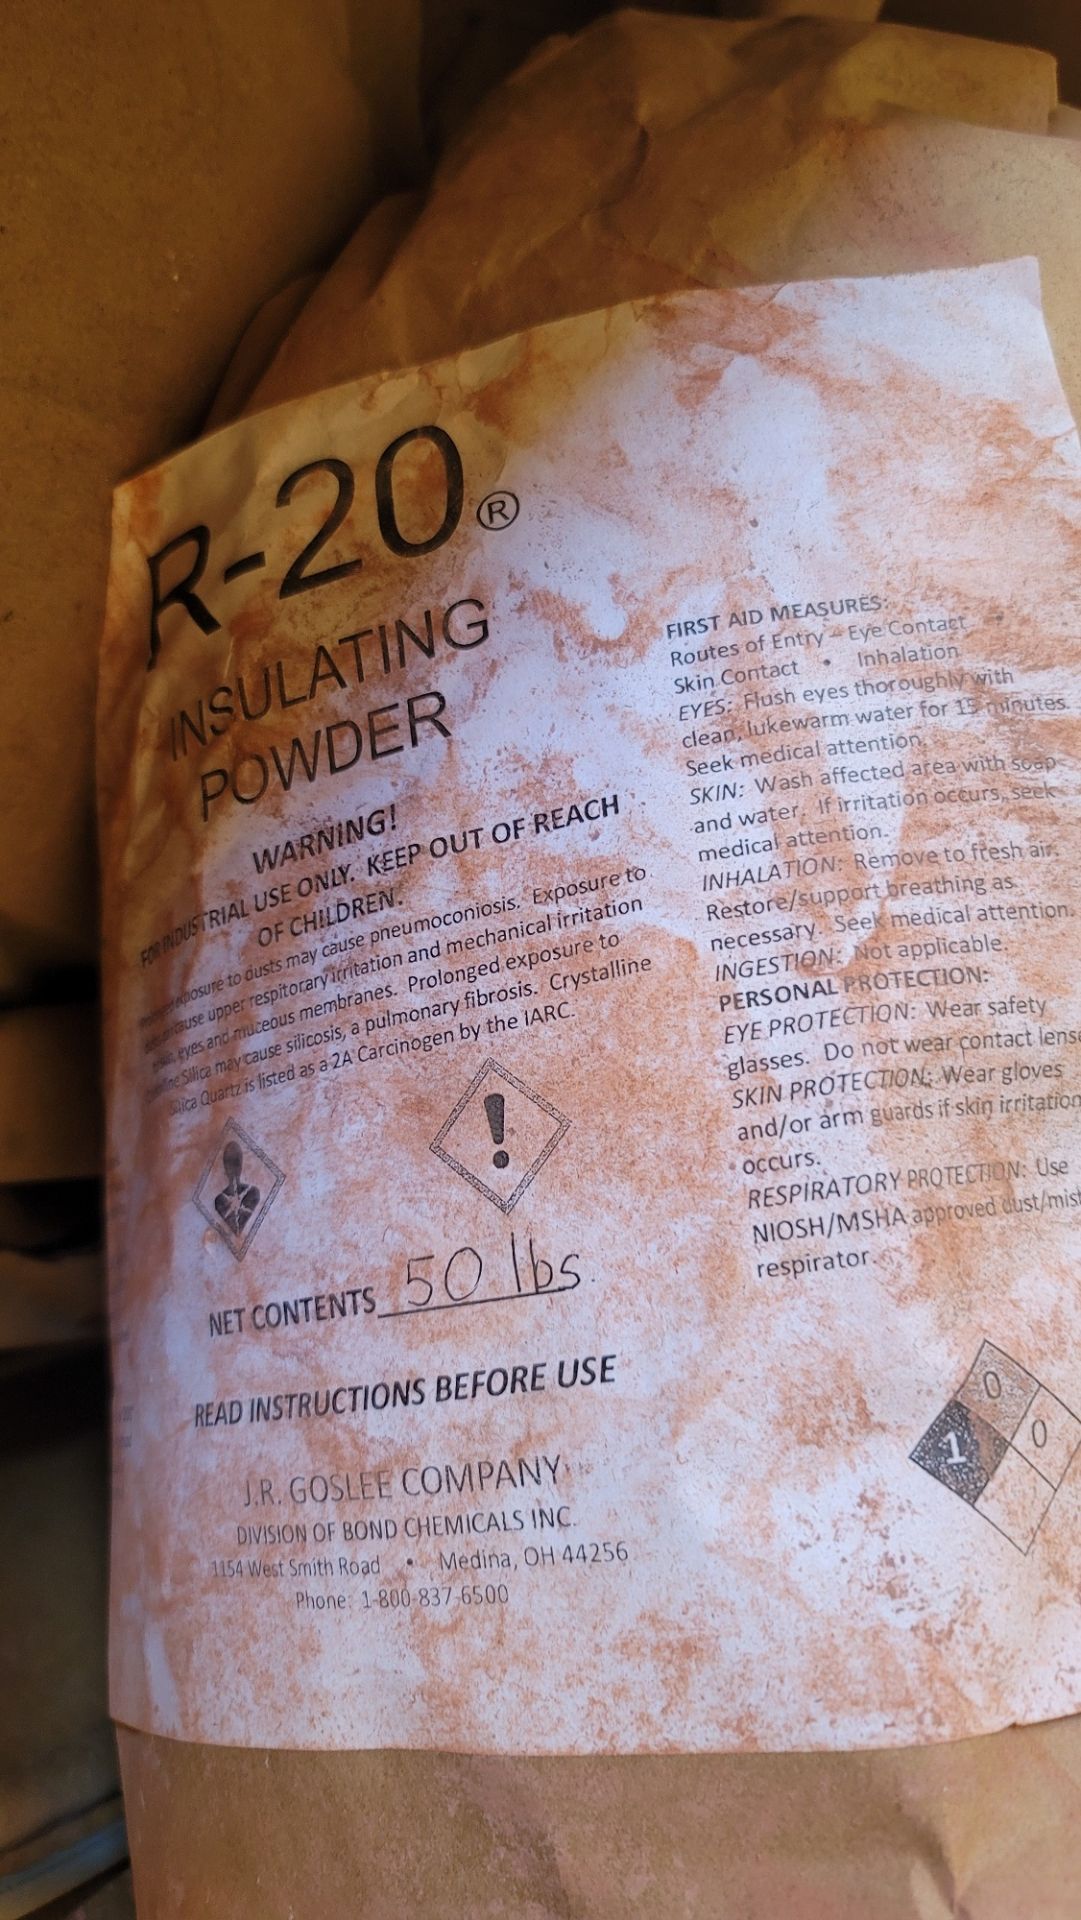 LOT - (4) DRUMS OF R-20 INSULATING POWDER - Image 2 of 3